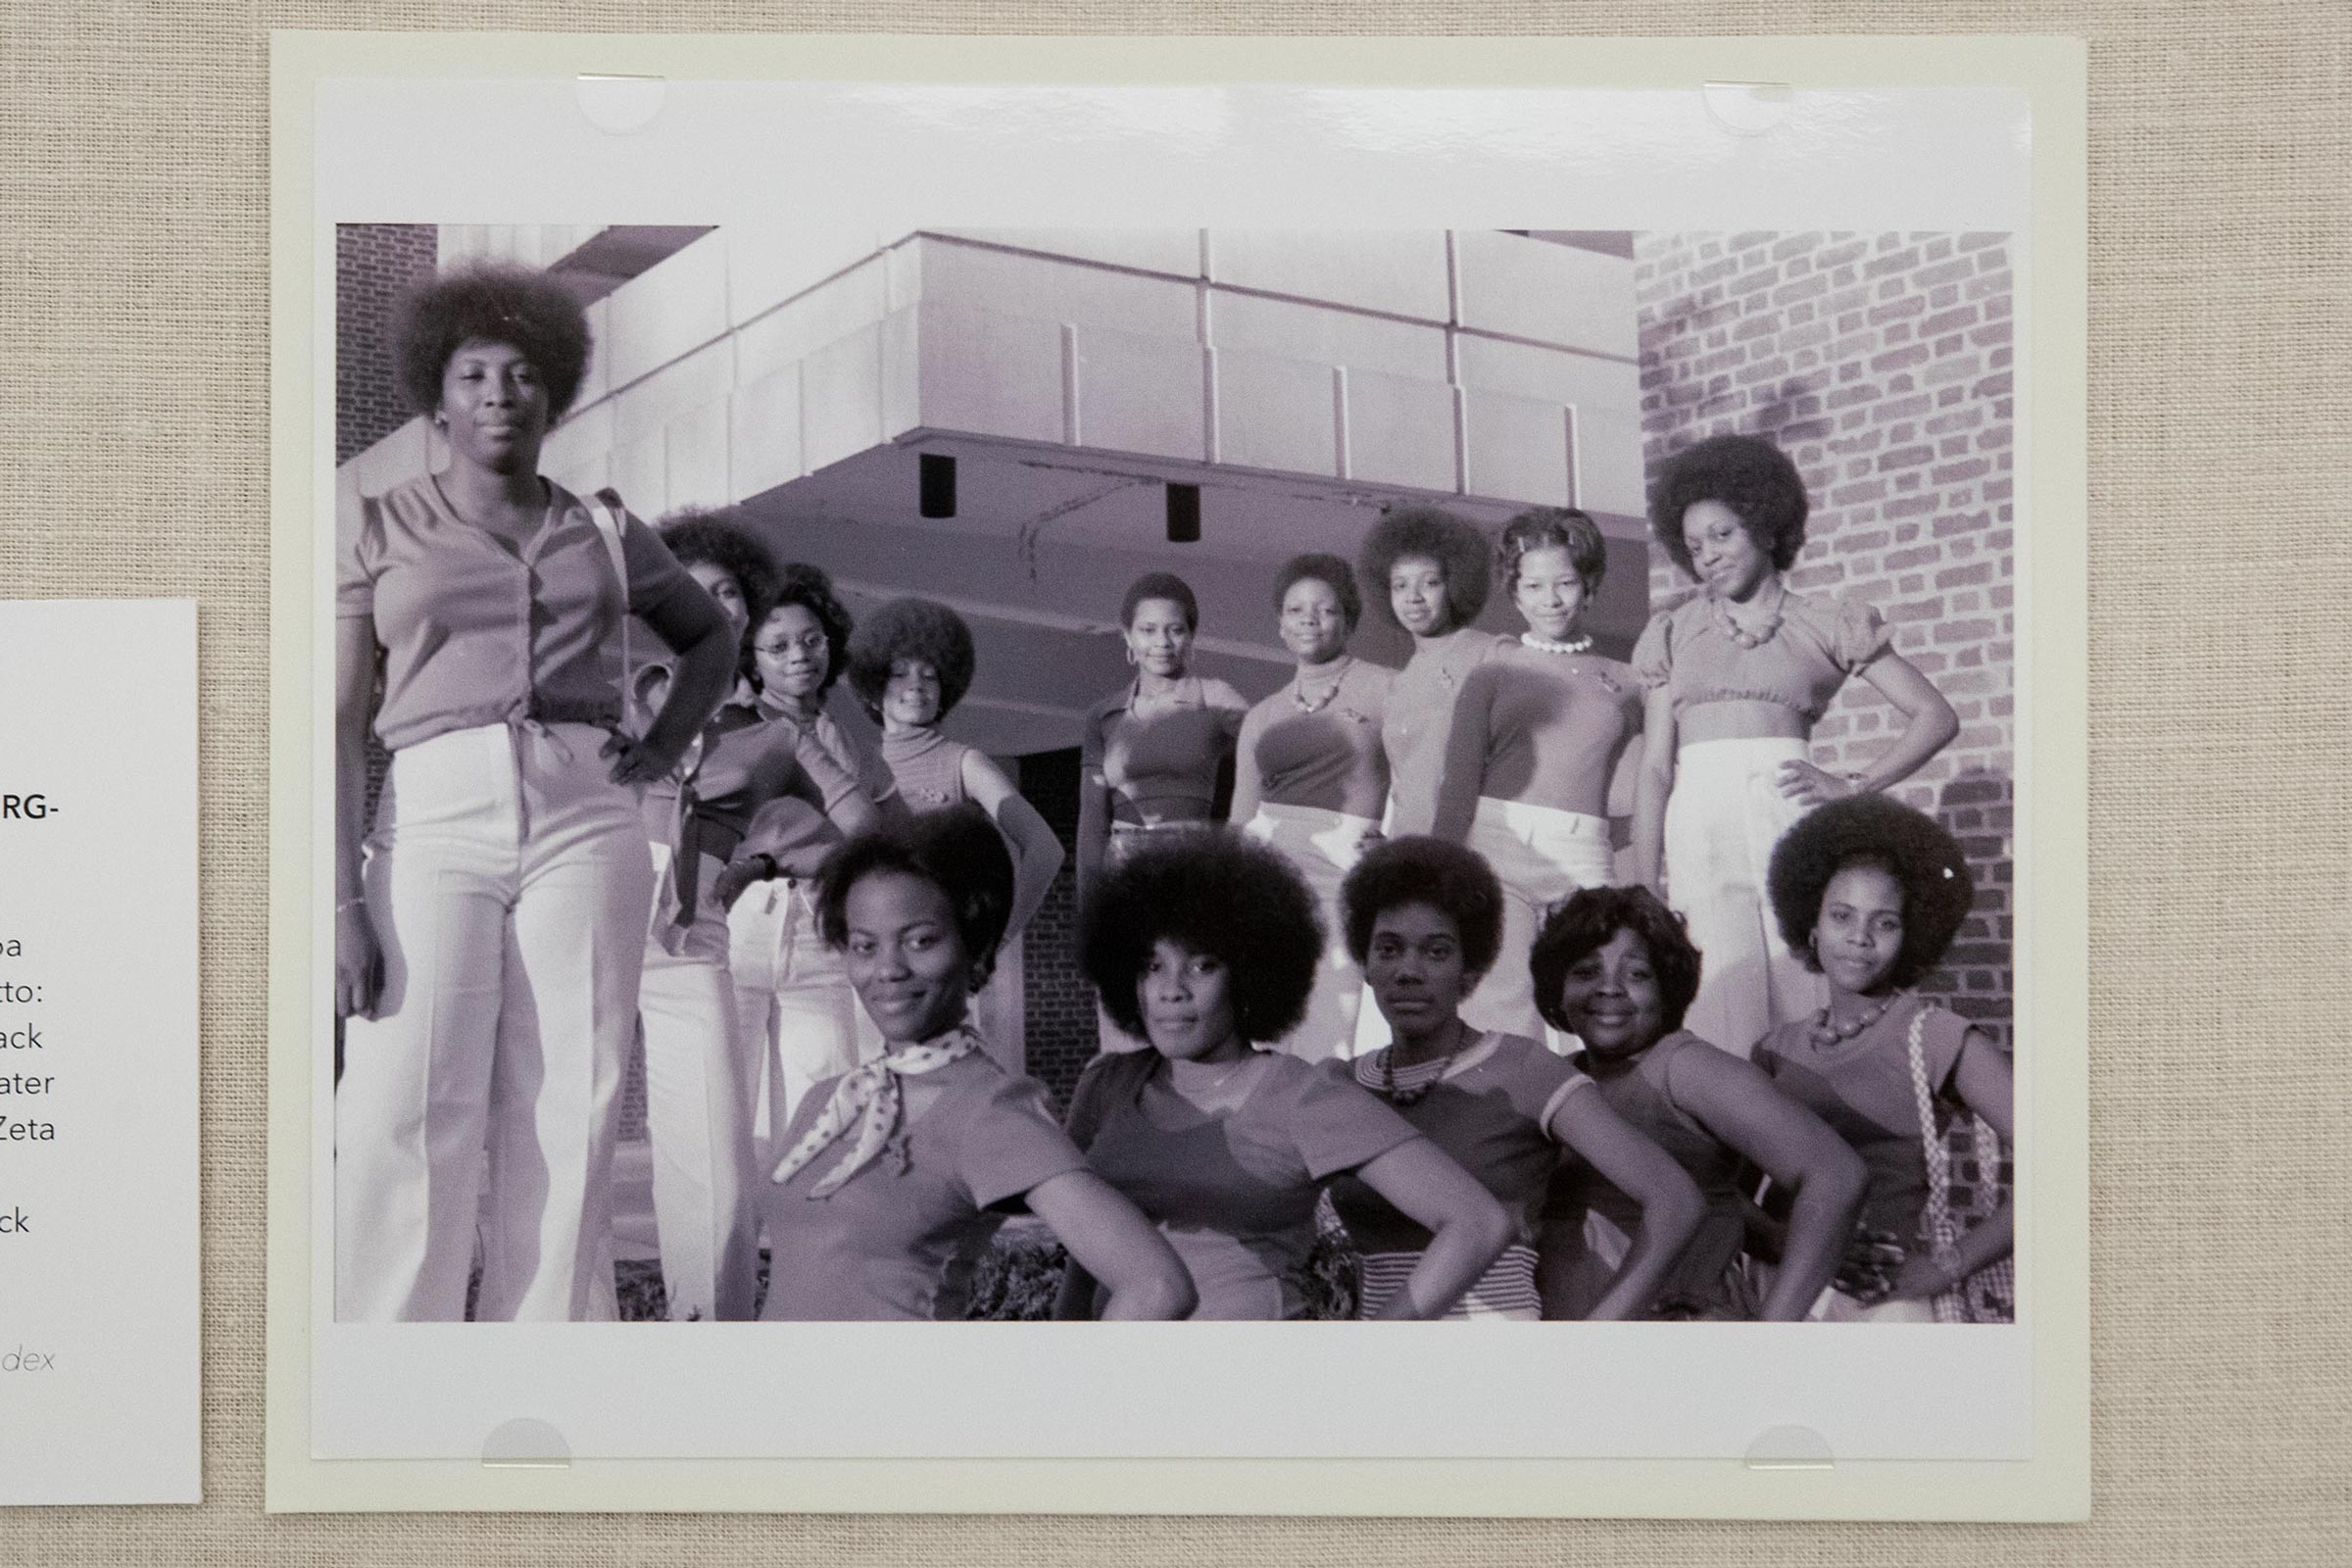 black and white photo of the first black sorority at UVA was the Kappa Rho chapter of Delta Sigma Theta, chartered in 1973.